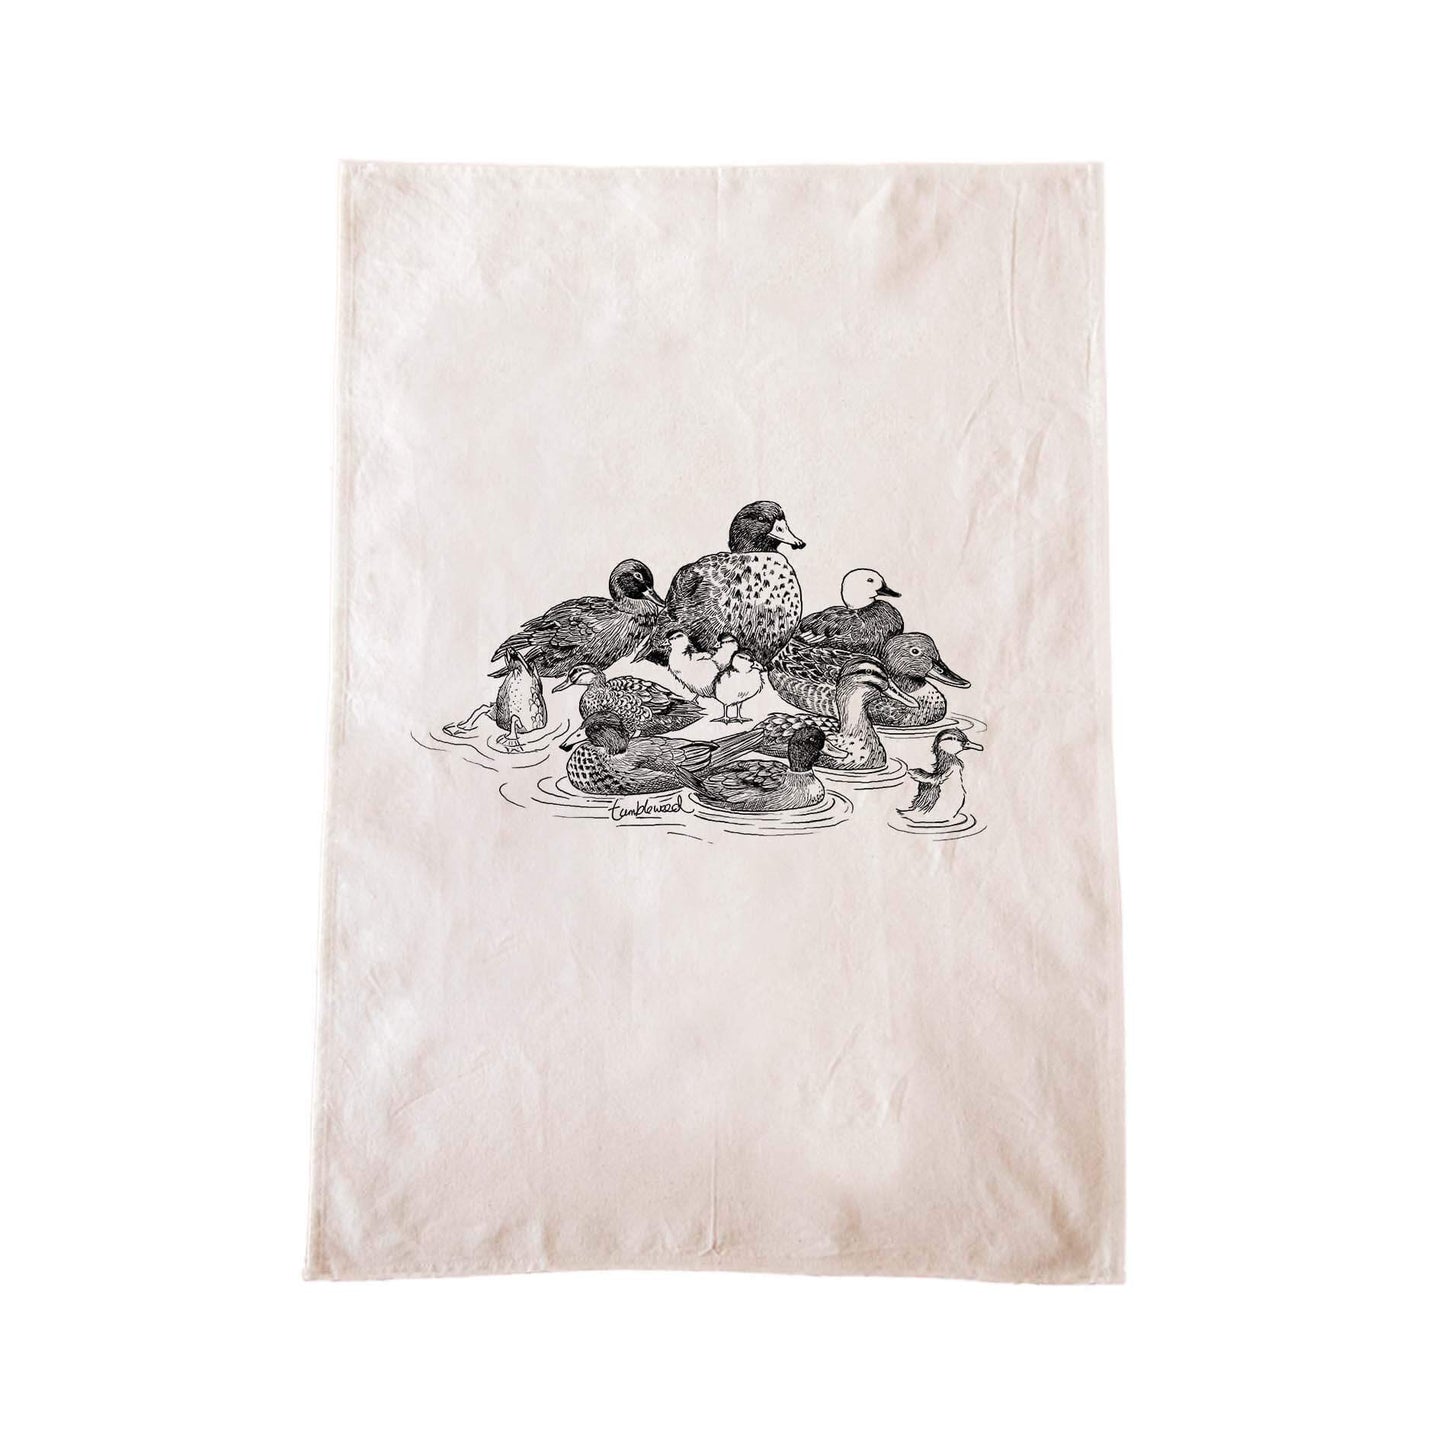 Off-white cotton tea towel with a screen printed NZ Ducks design.